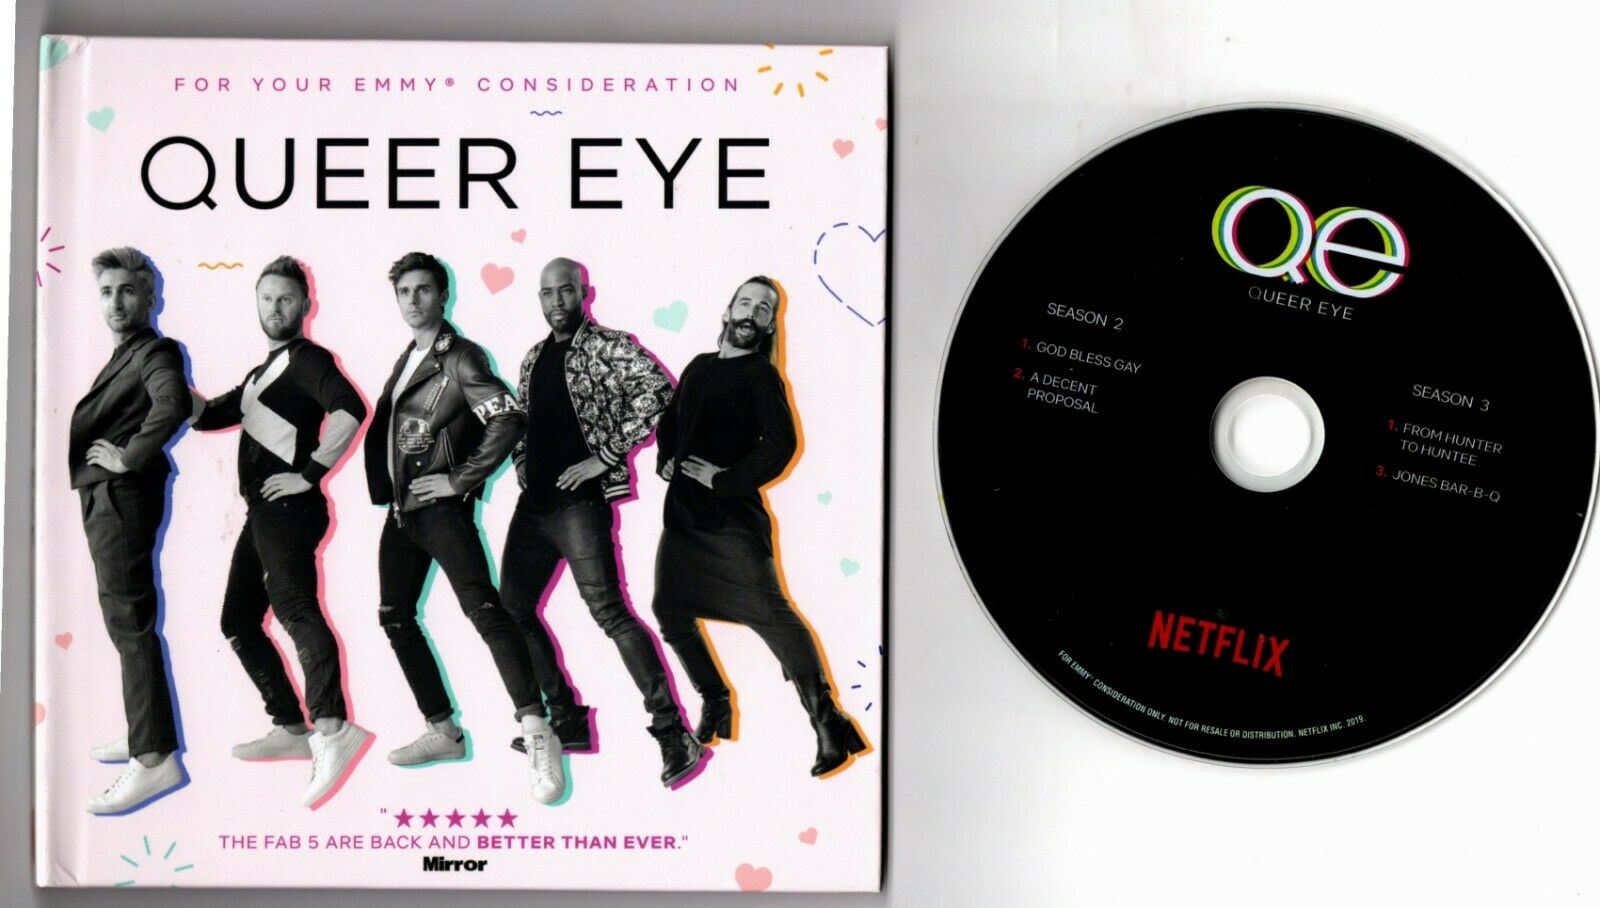 Queer Eye 2019 Netflix For Your Emmy Consideration Dvd Parts Of Season 2 & 3